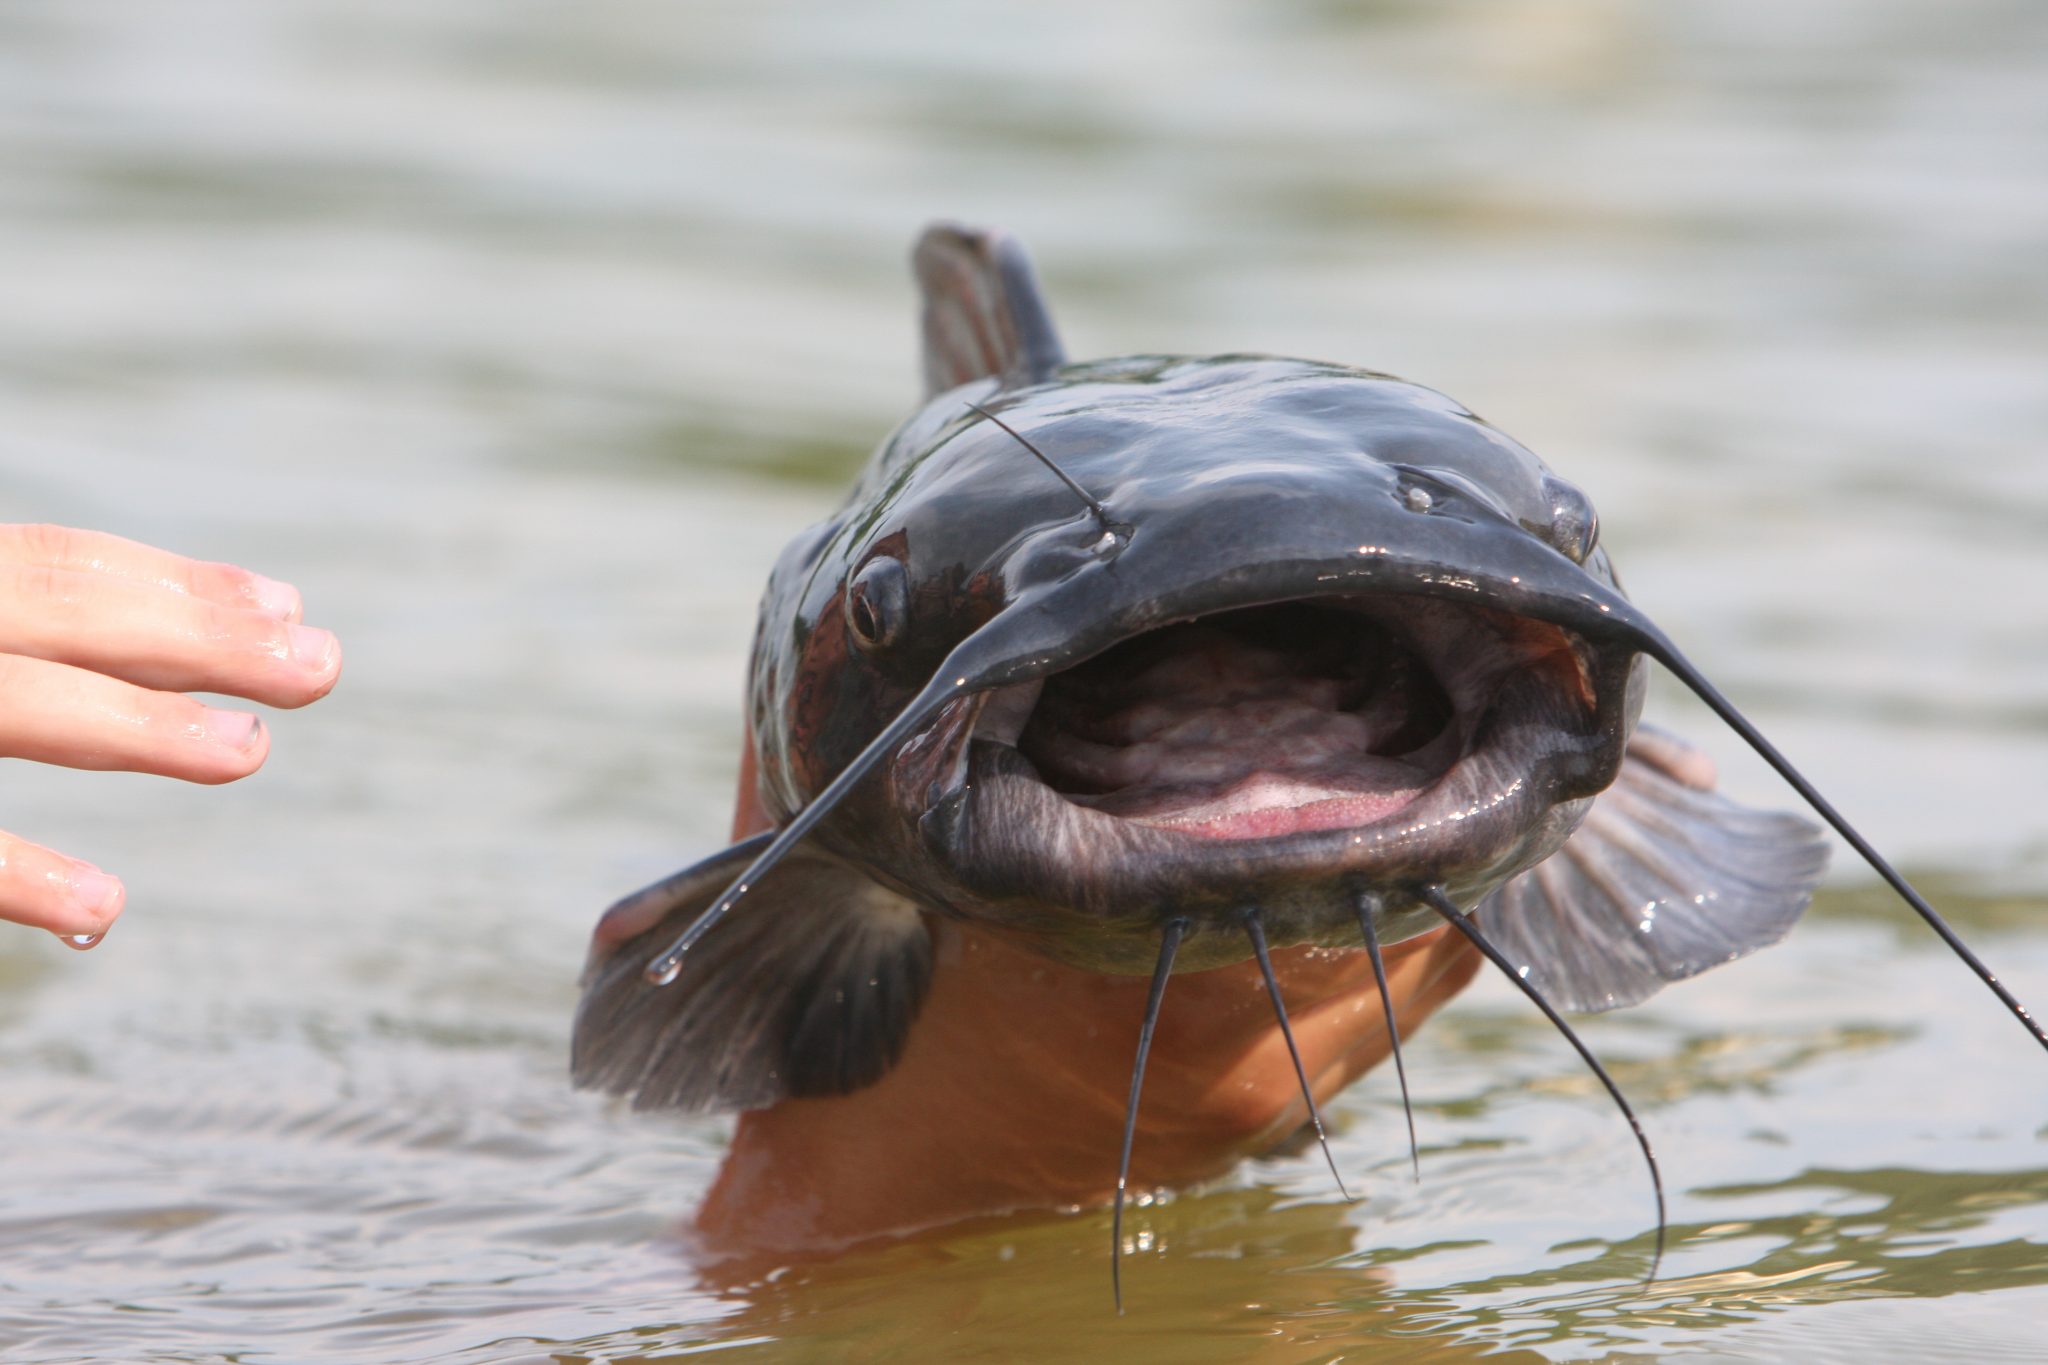 Catfish jumping out of pond